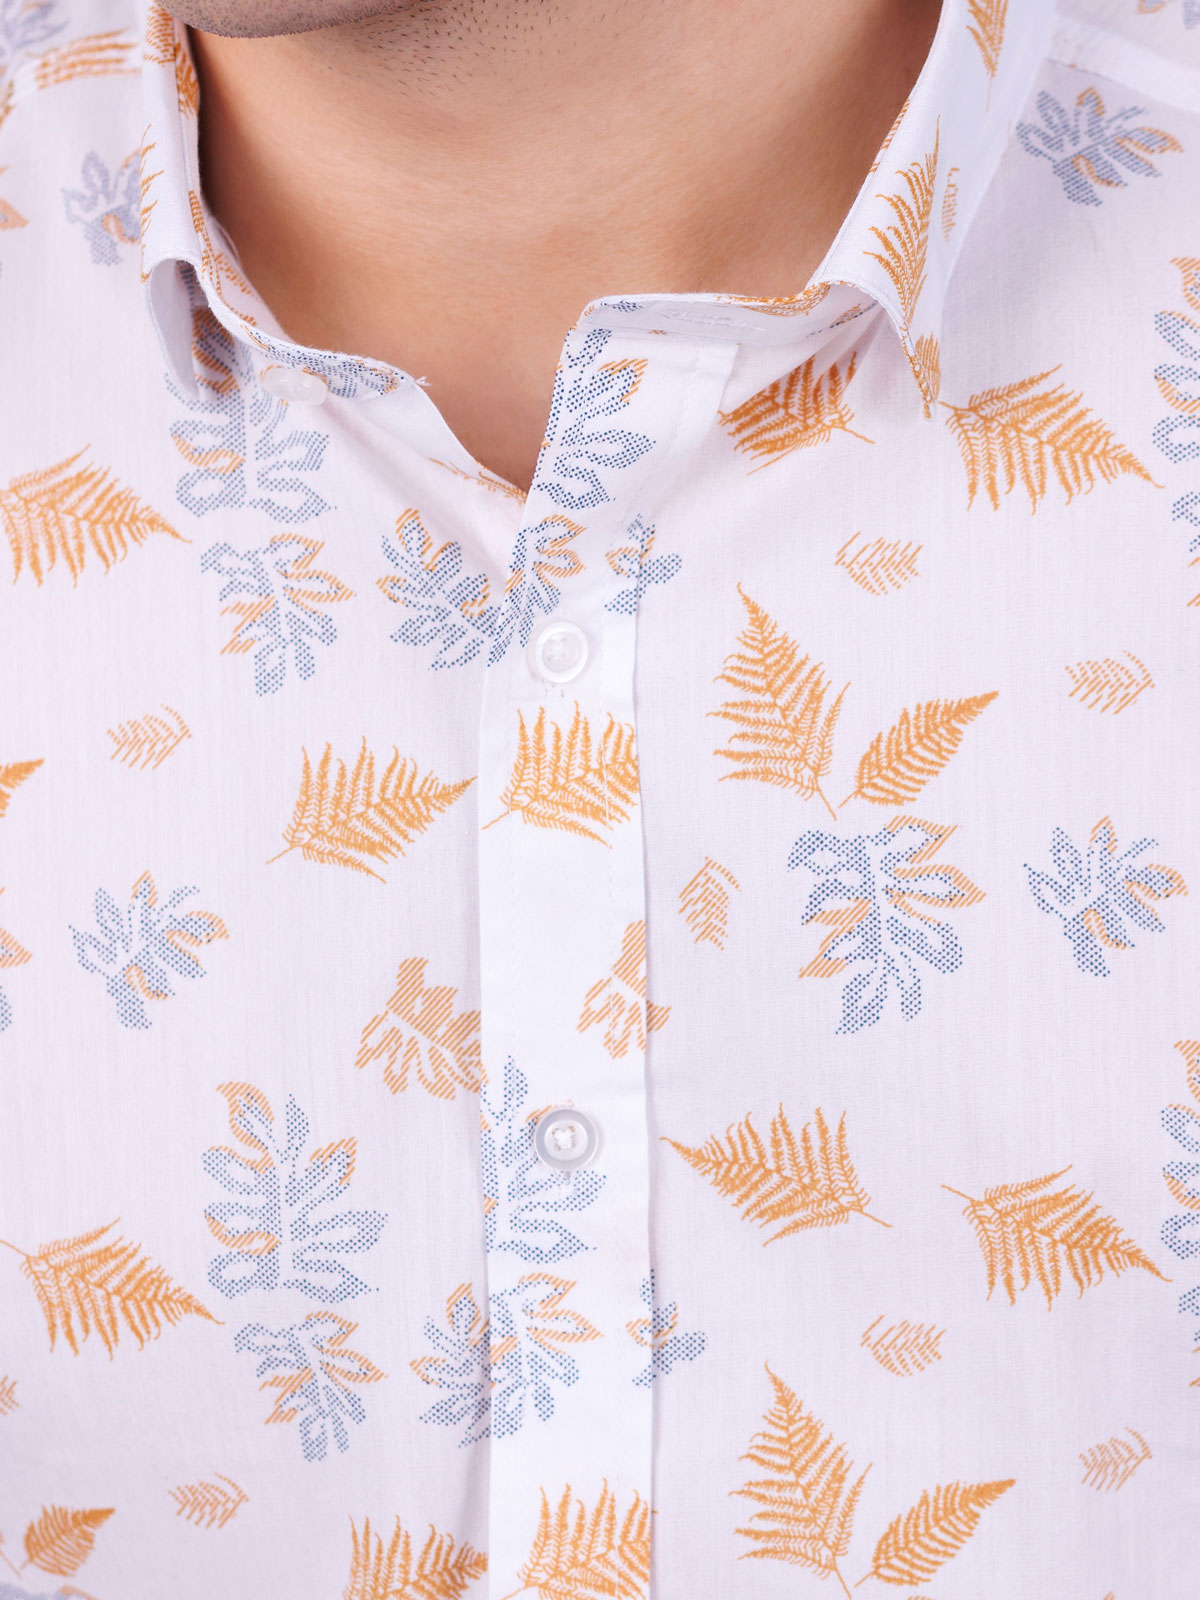 Shirt with leaf and twig print - 80232 € 40.49 img3